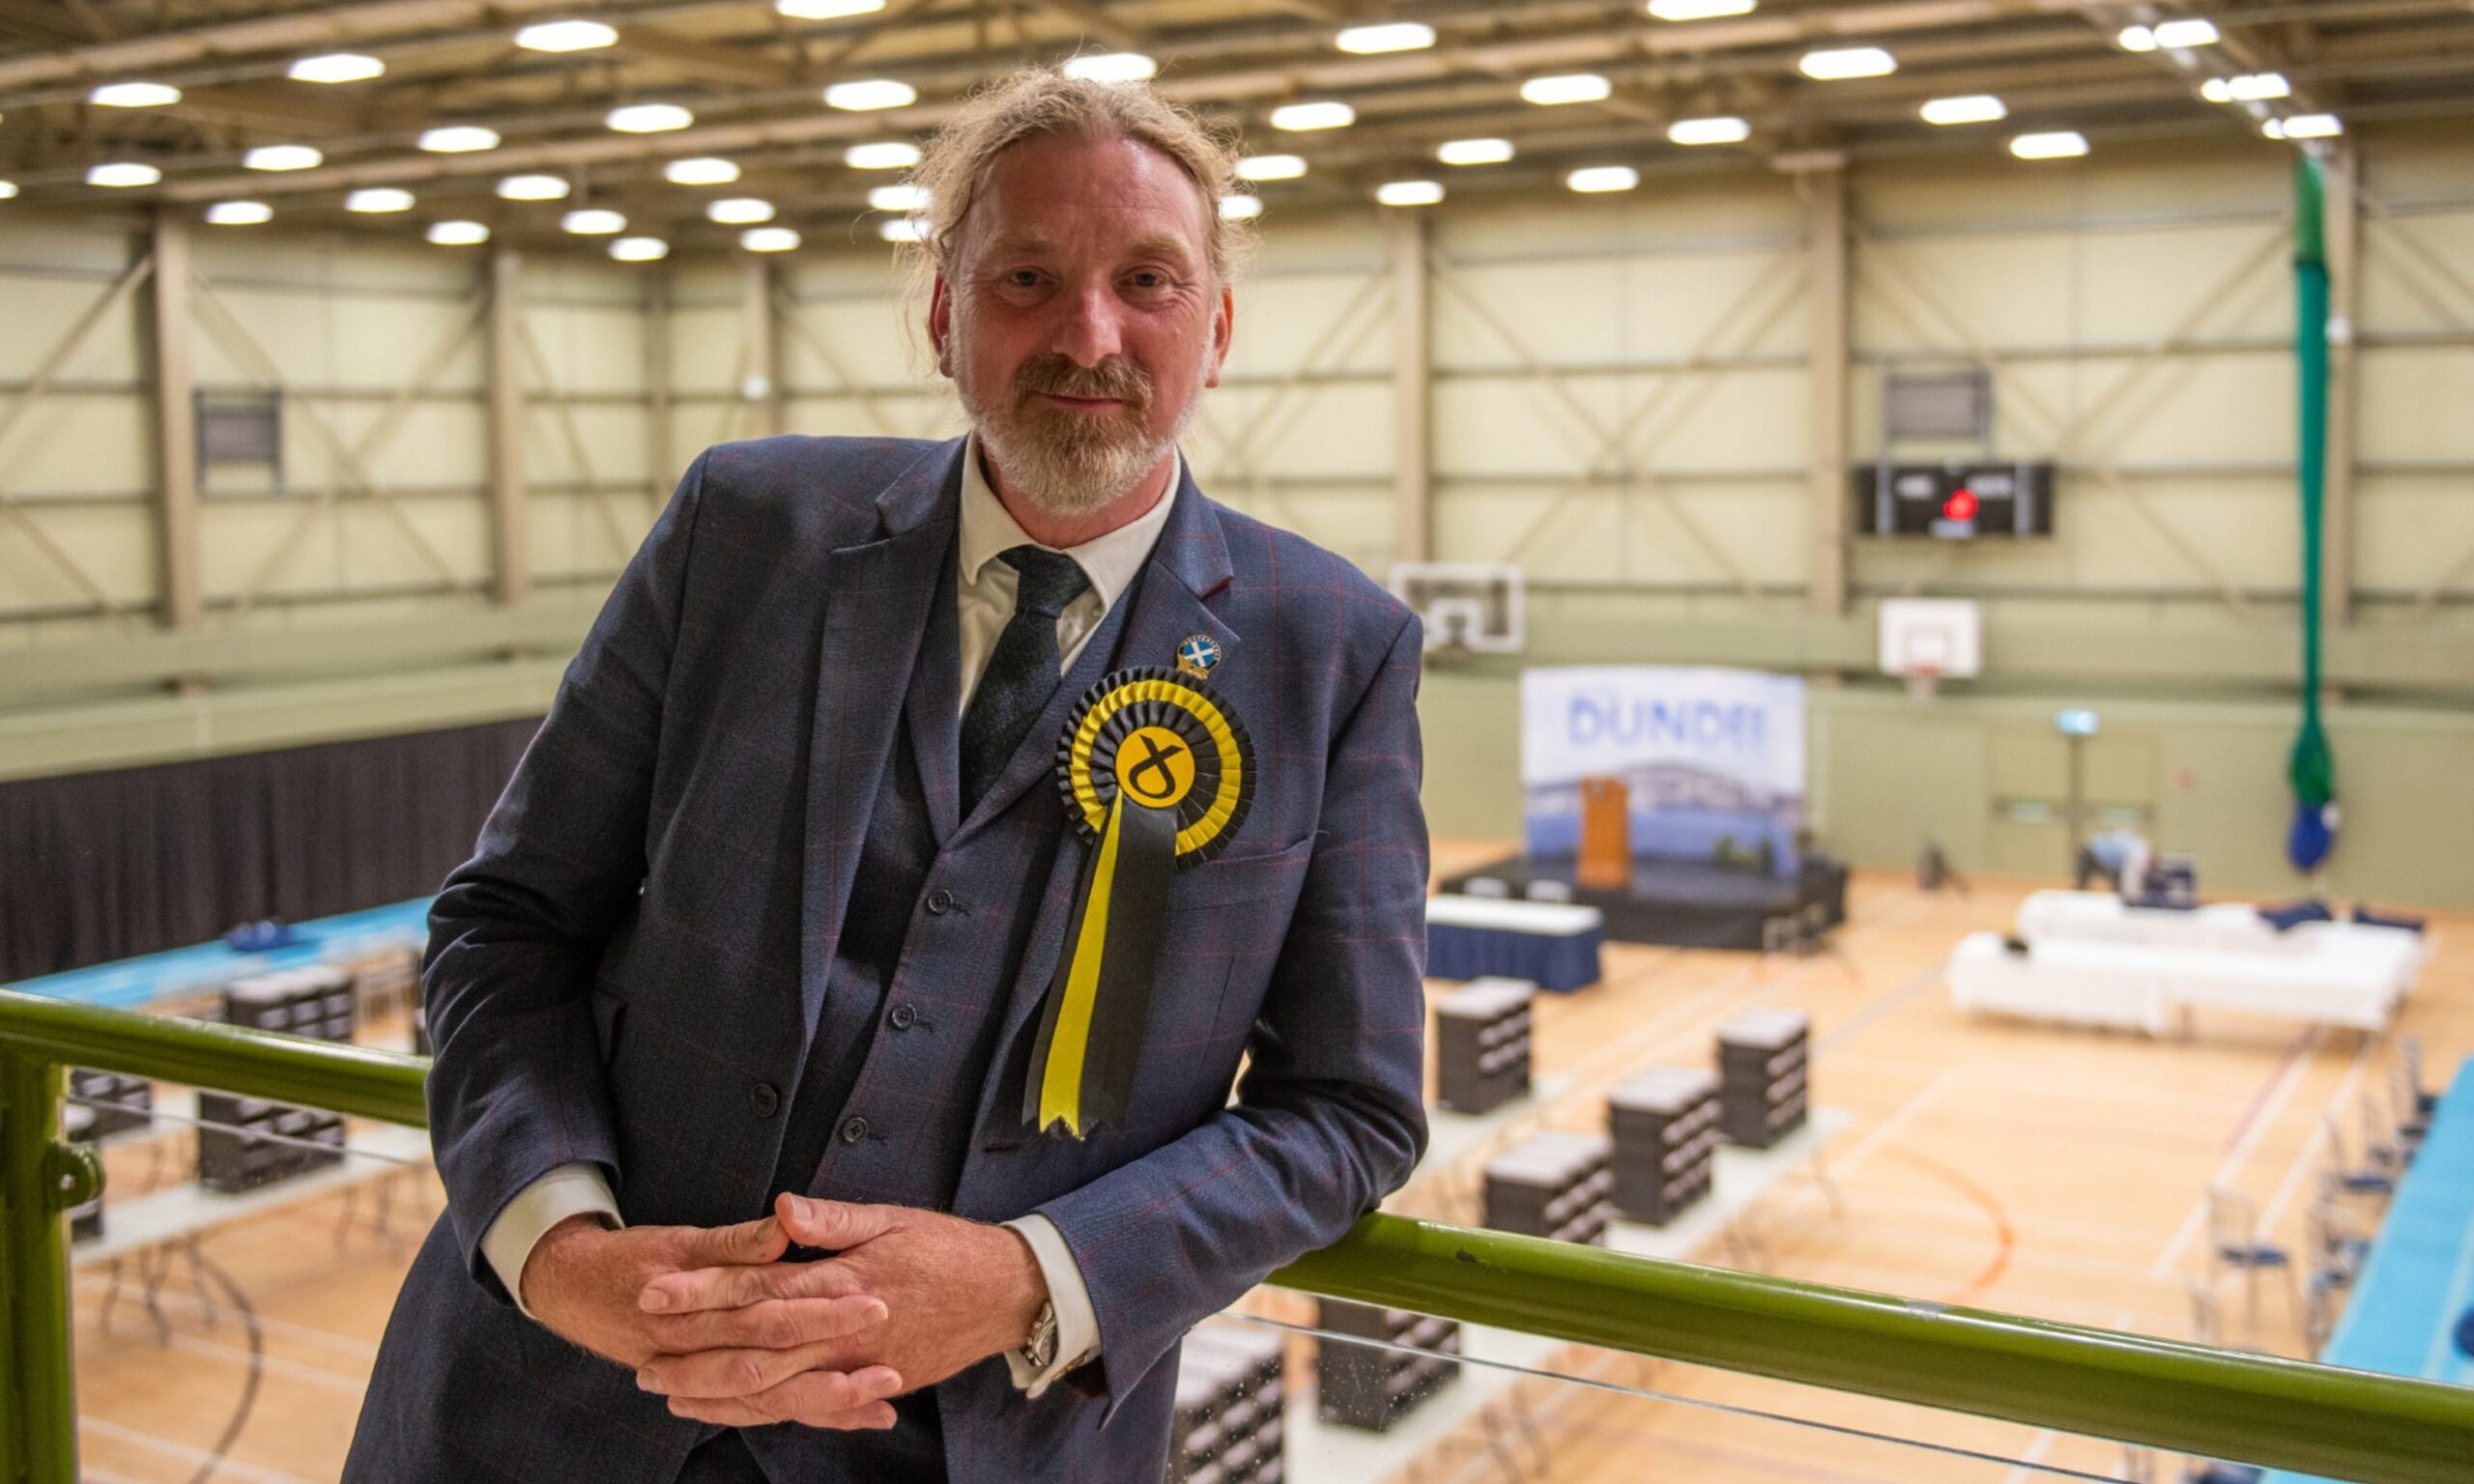 Dundee Central SNP MP Chris Law. Image: Kim Cessford/DC Thomson.